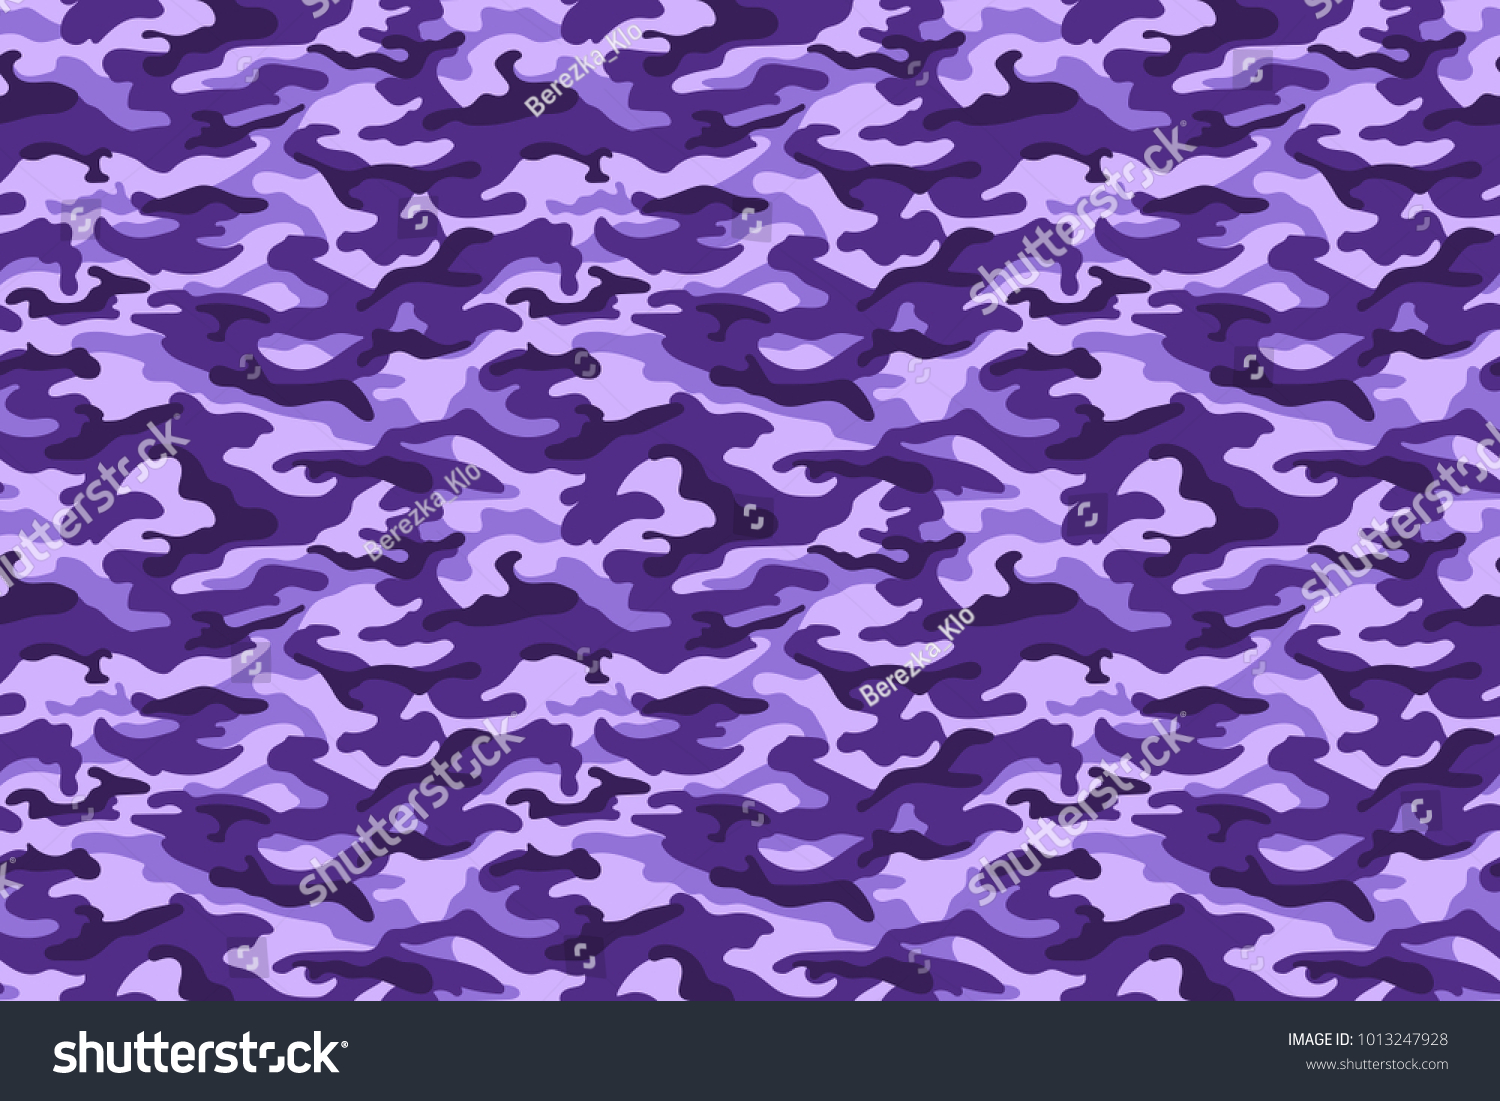 Purple Camouflage Texture Vector Stock Vector (Royalty Free) 1013247928 ...